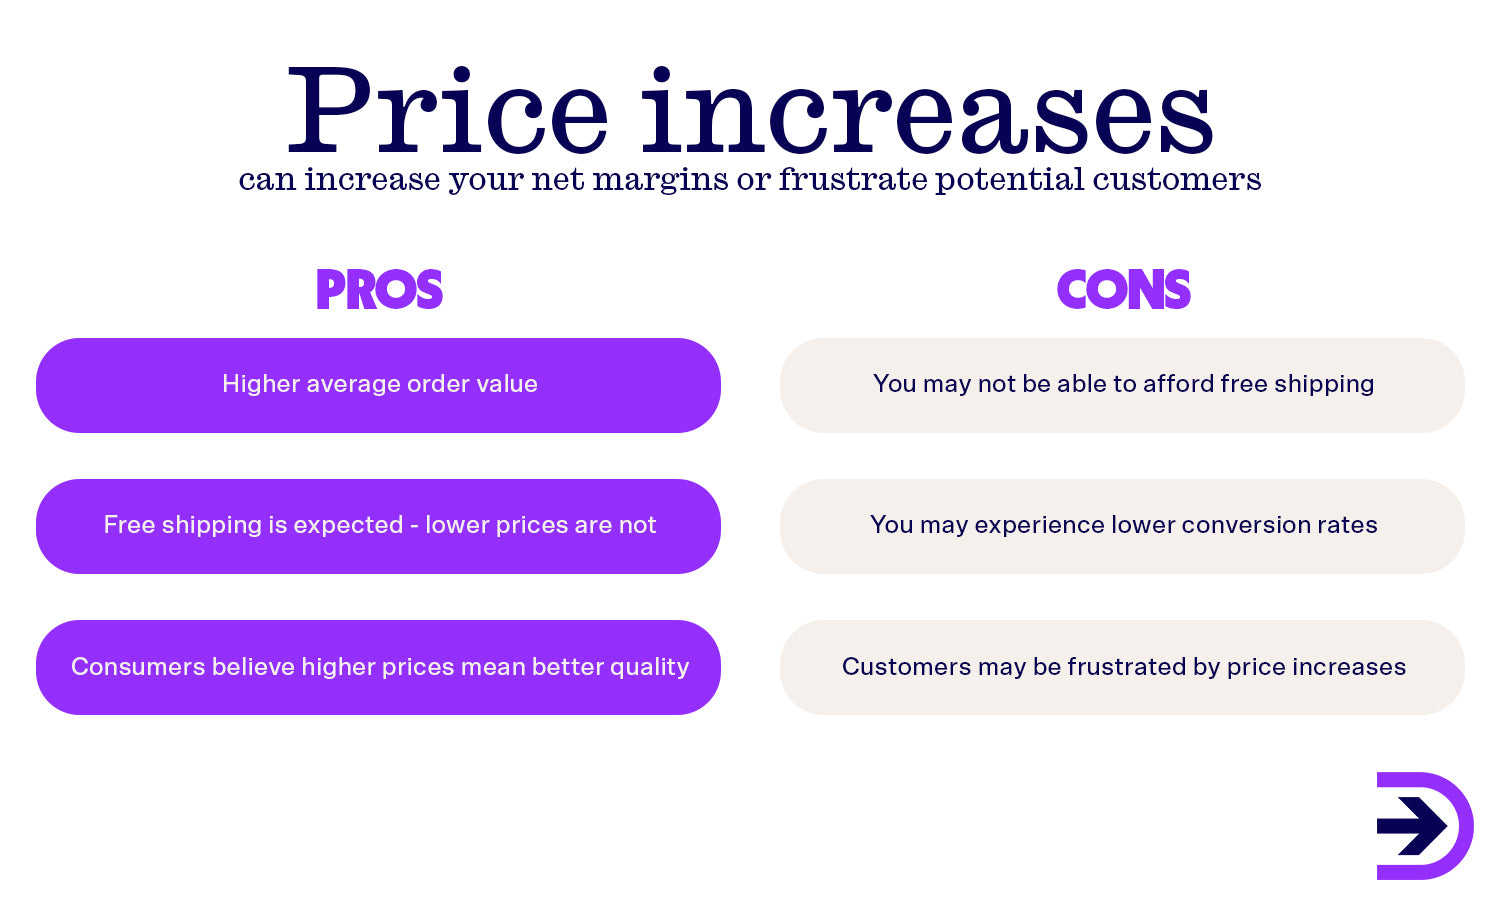 Increasing your prices online can ultimately lead to higher average order values even if you notice lower conversion rates.